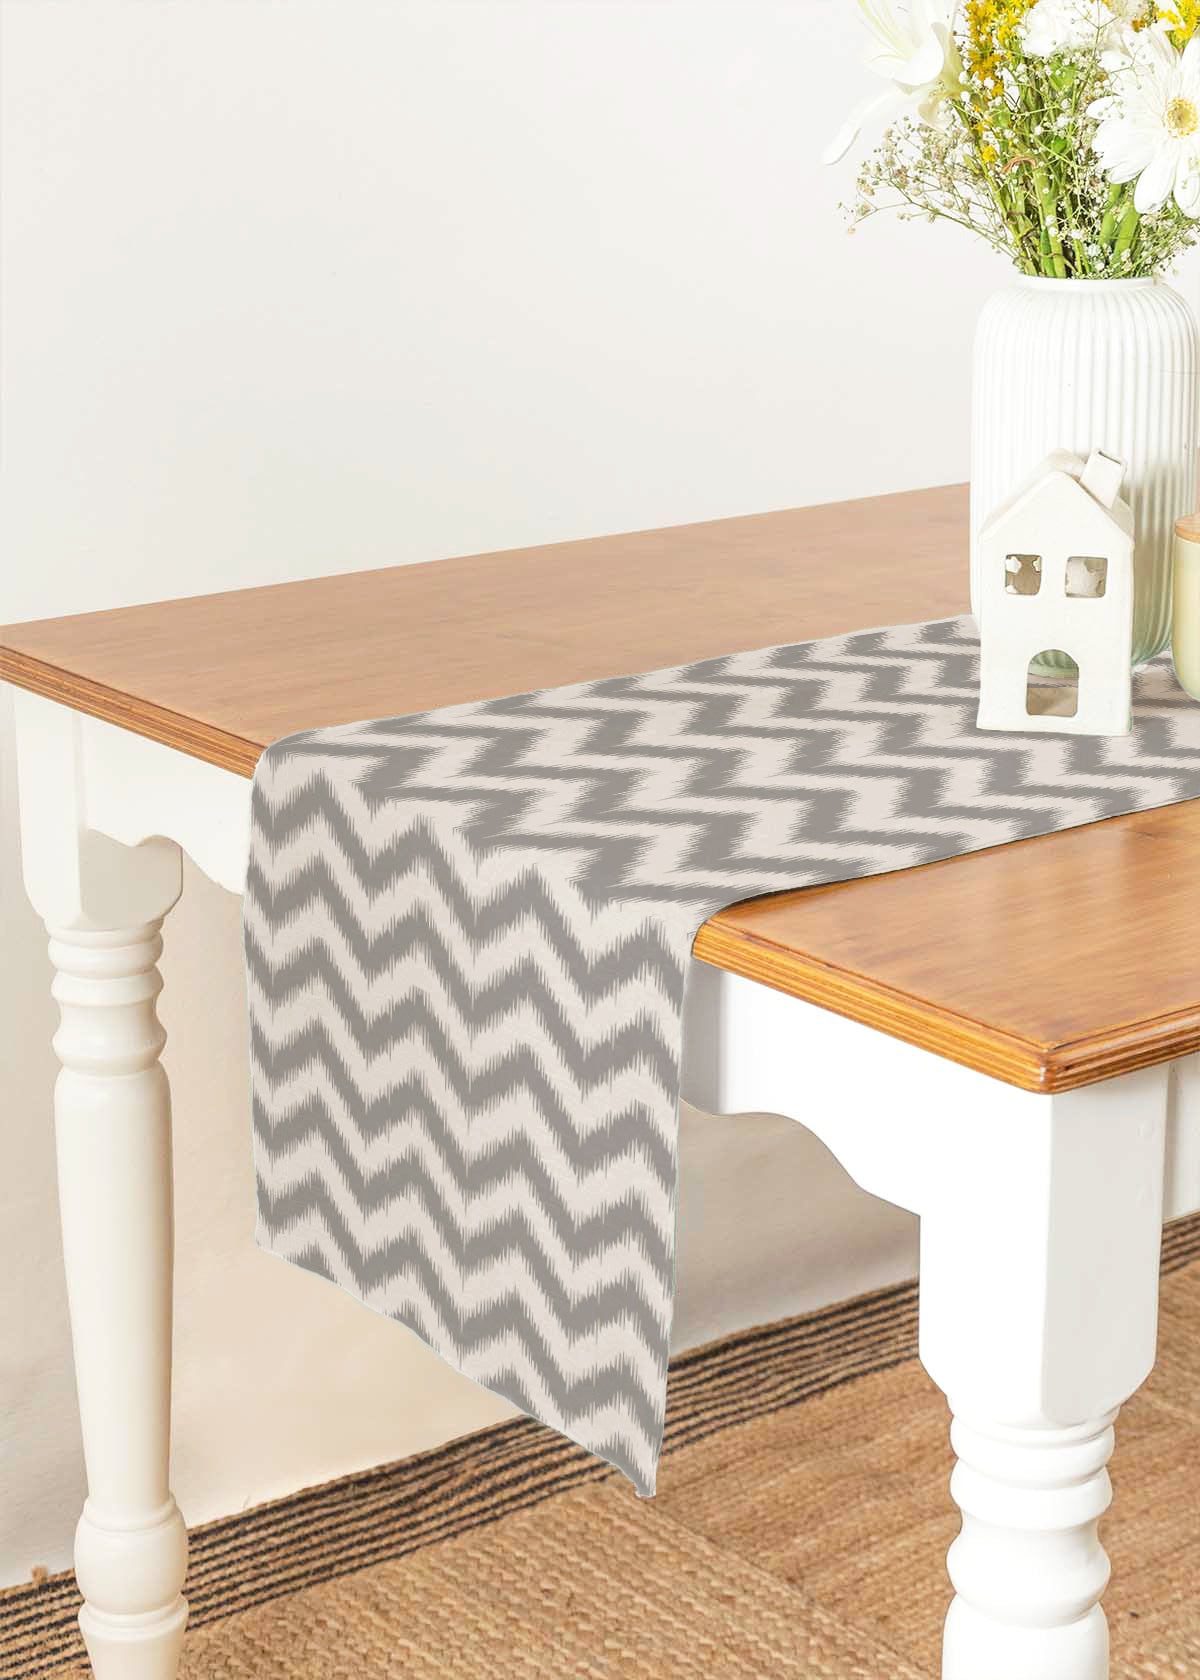 Ikat 100% cotton geometric table runner for 4 seater or 6 seater dining - Grey